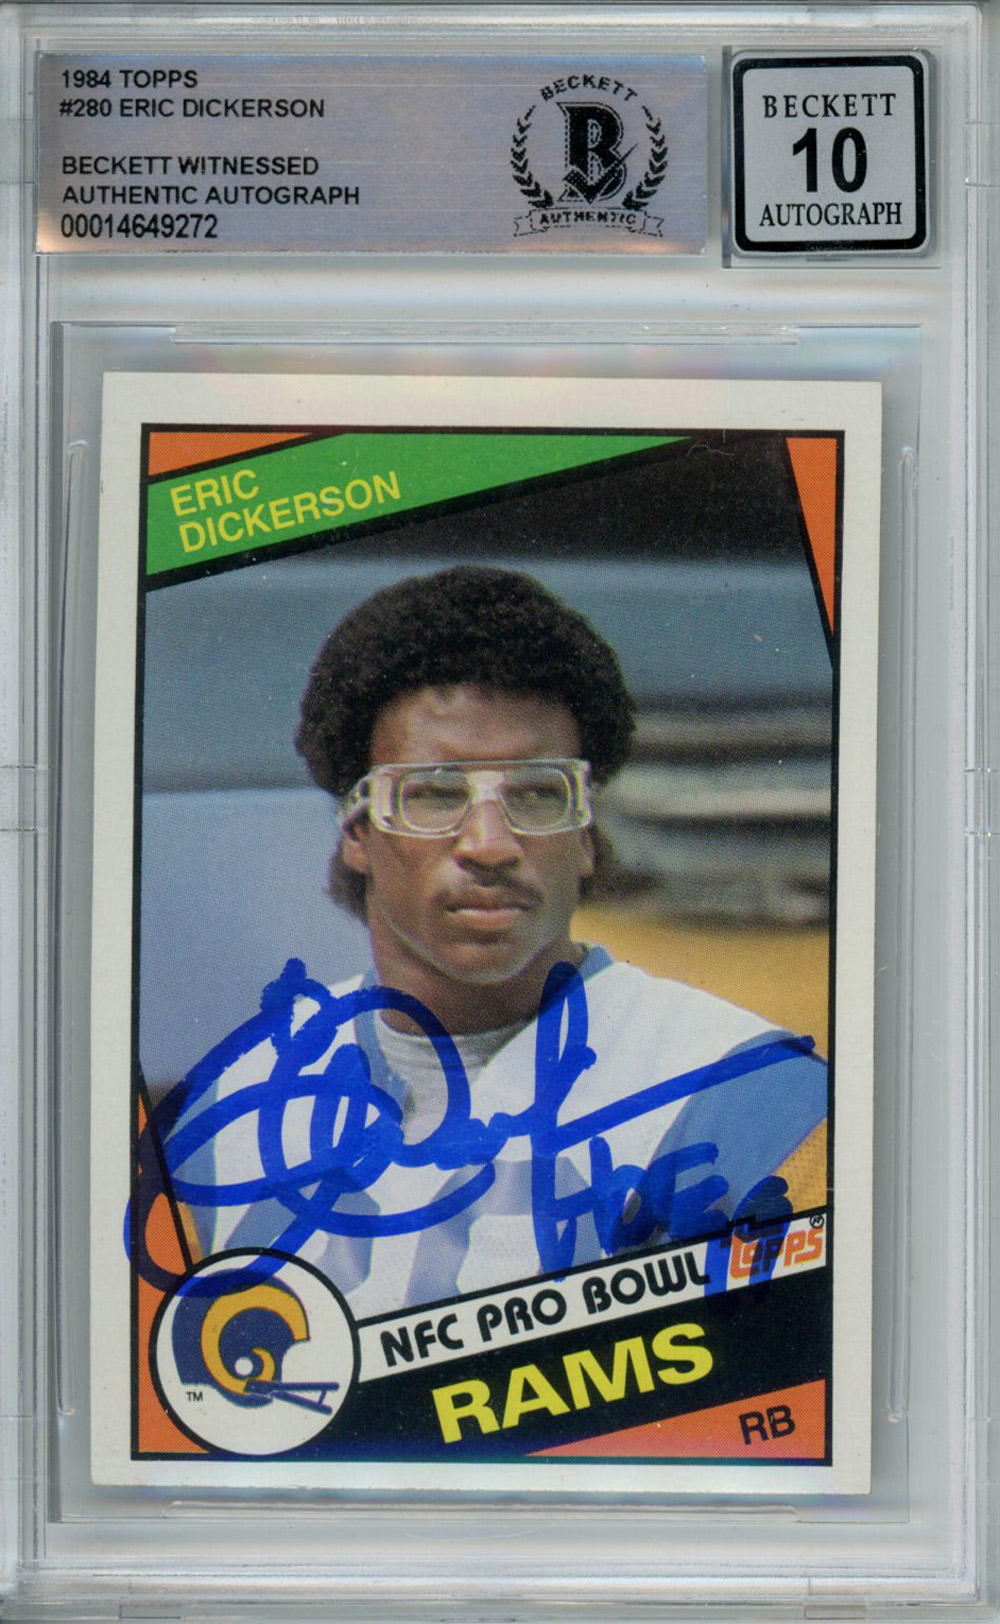 Eric Dickerson Autographed 1984 Topps #280 Rookie Card HOF Beckett Slab